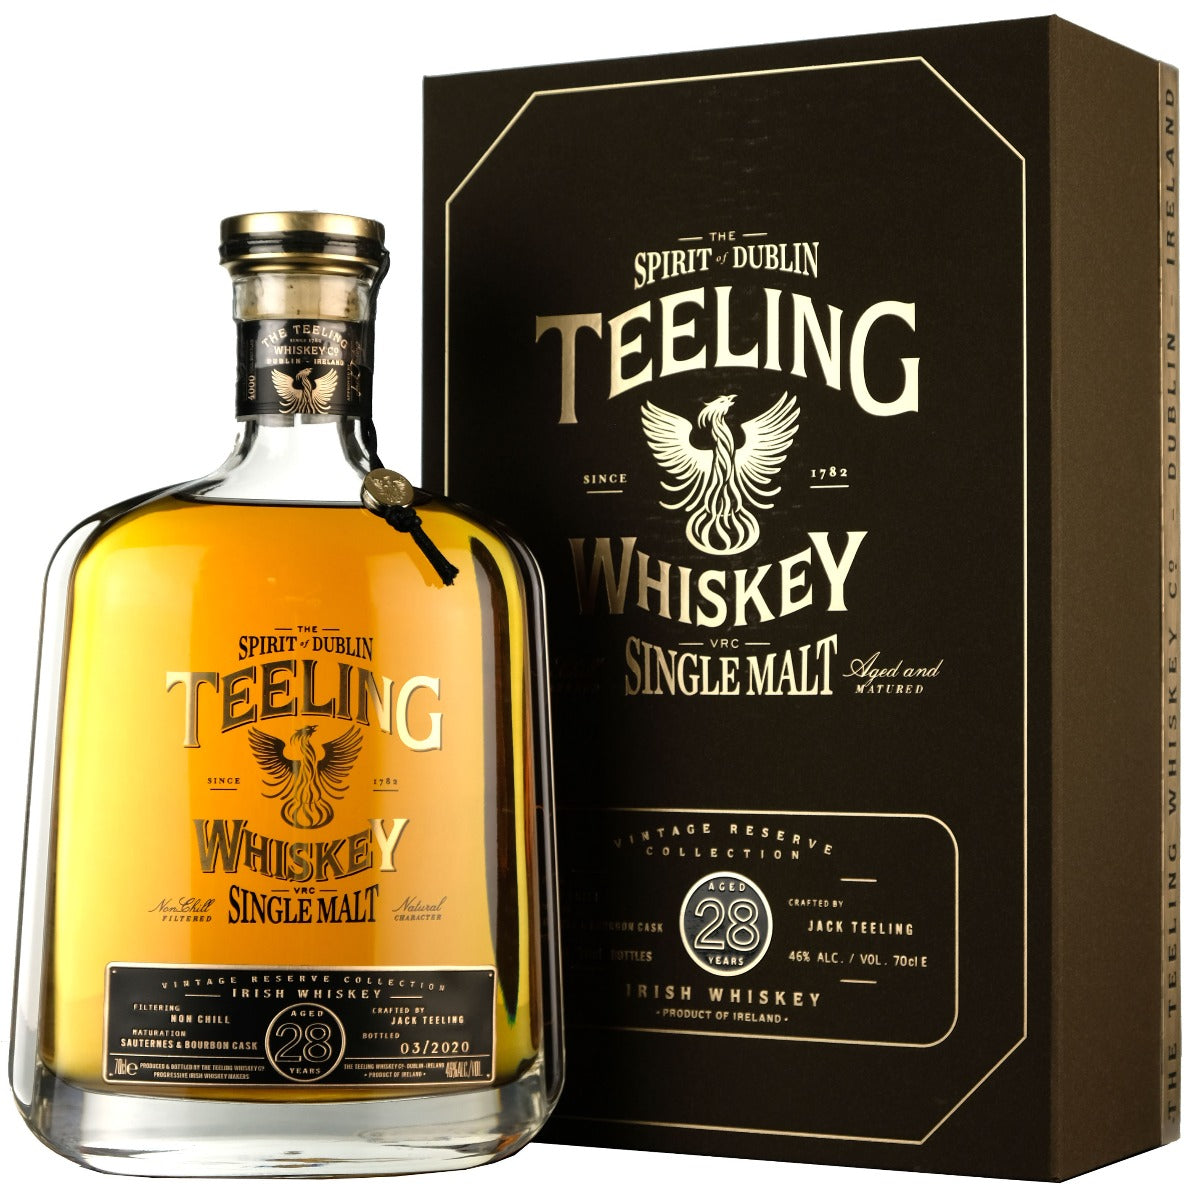 The Teeling Whiskey Co. Vintage Reserve Collection 28 Year Old